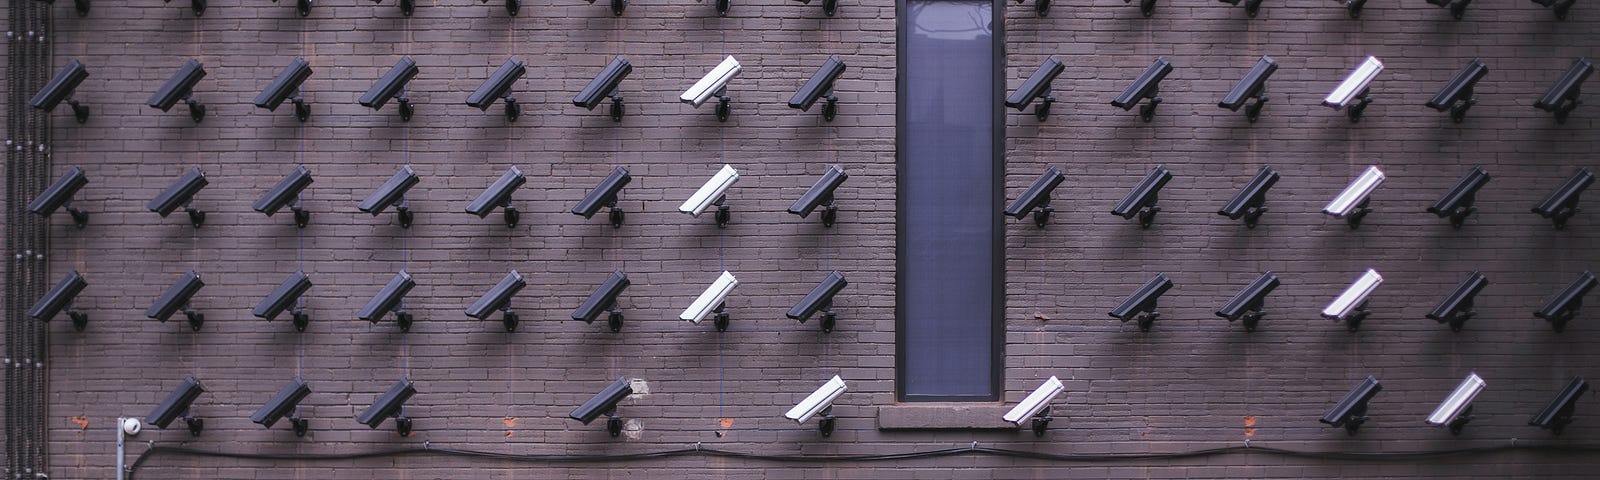 Two people look up at dozens of security cameras along a build